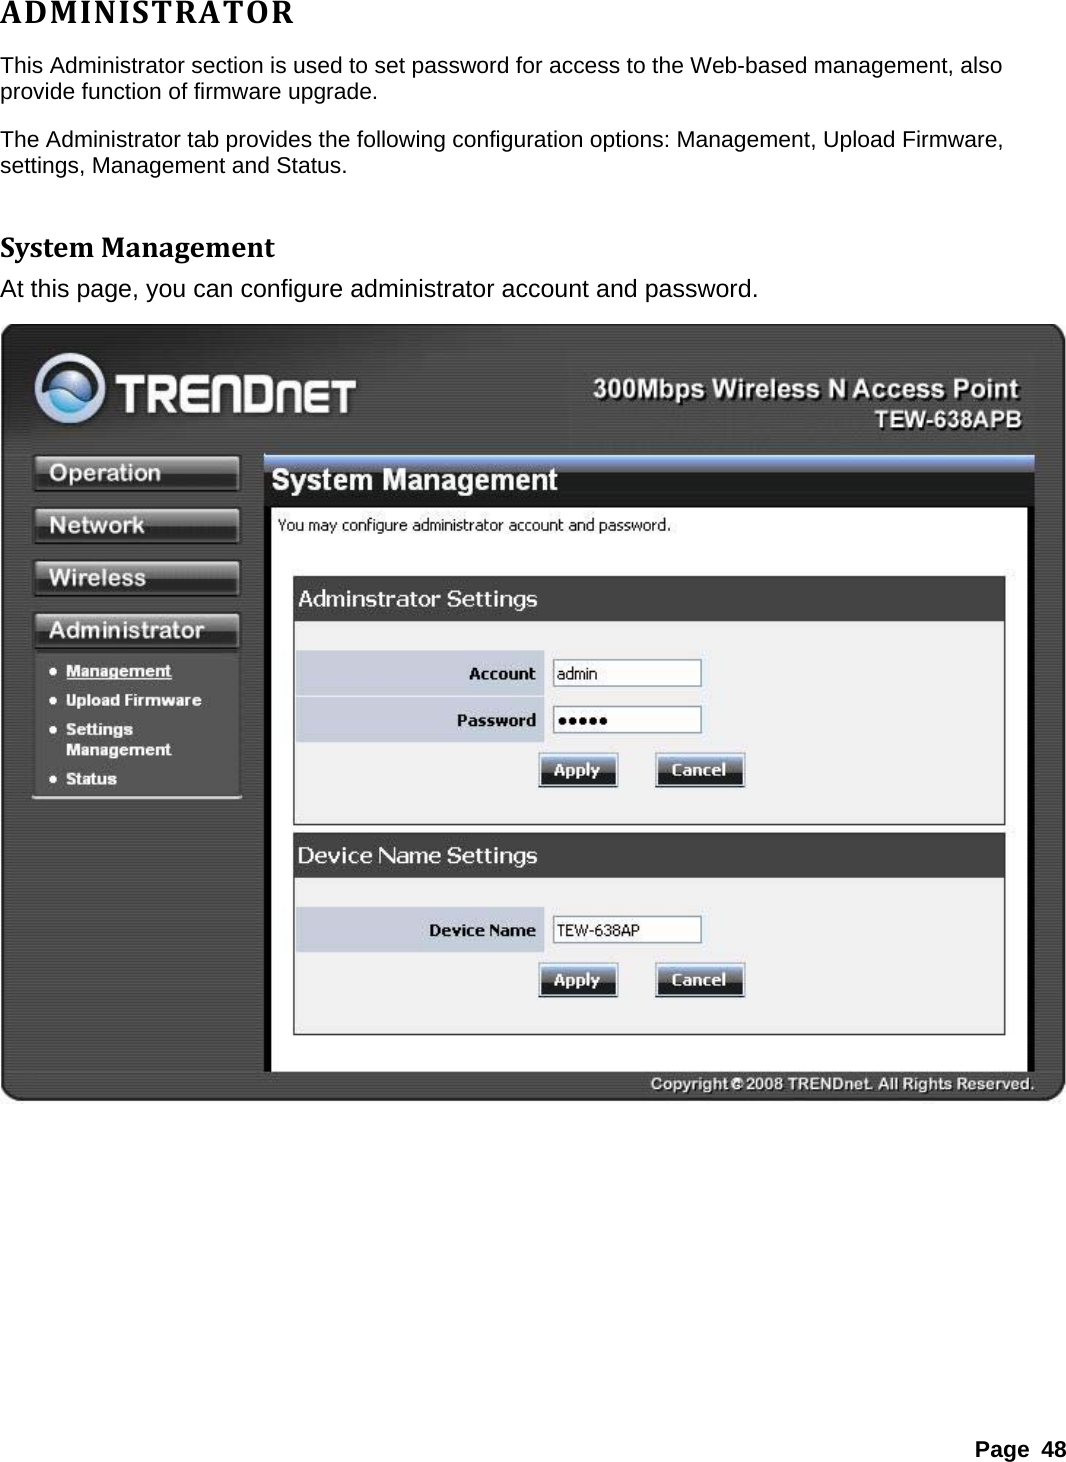 ADMINISTRATORThis Administrator section is used to set password for access to the Web-based management, also provide function of firmware upgrade. The Administrator tab provides the following configuration options: Management, Upload Firmware, settings, Management and Status.    SystemManagementAt this page, you can configure administrator account and password.   Page 48 